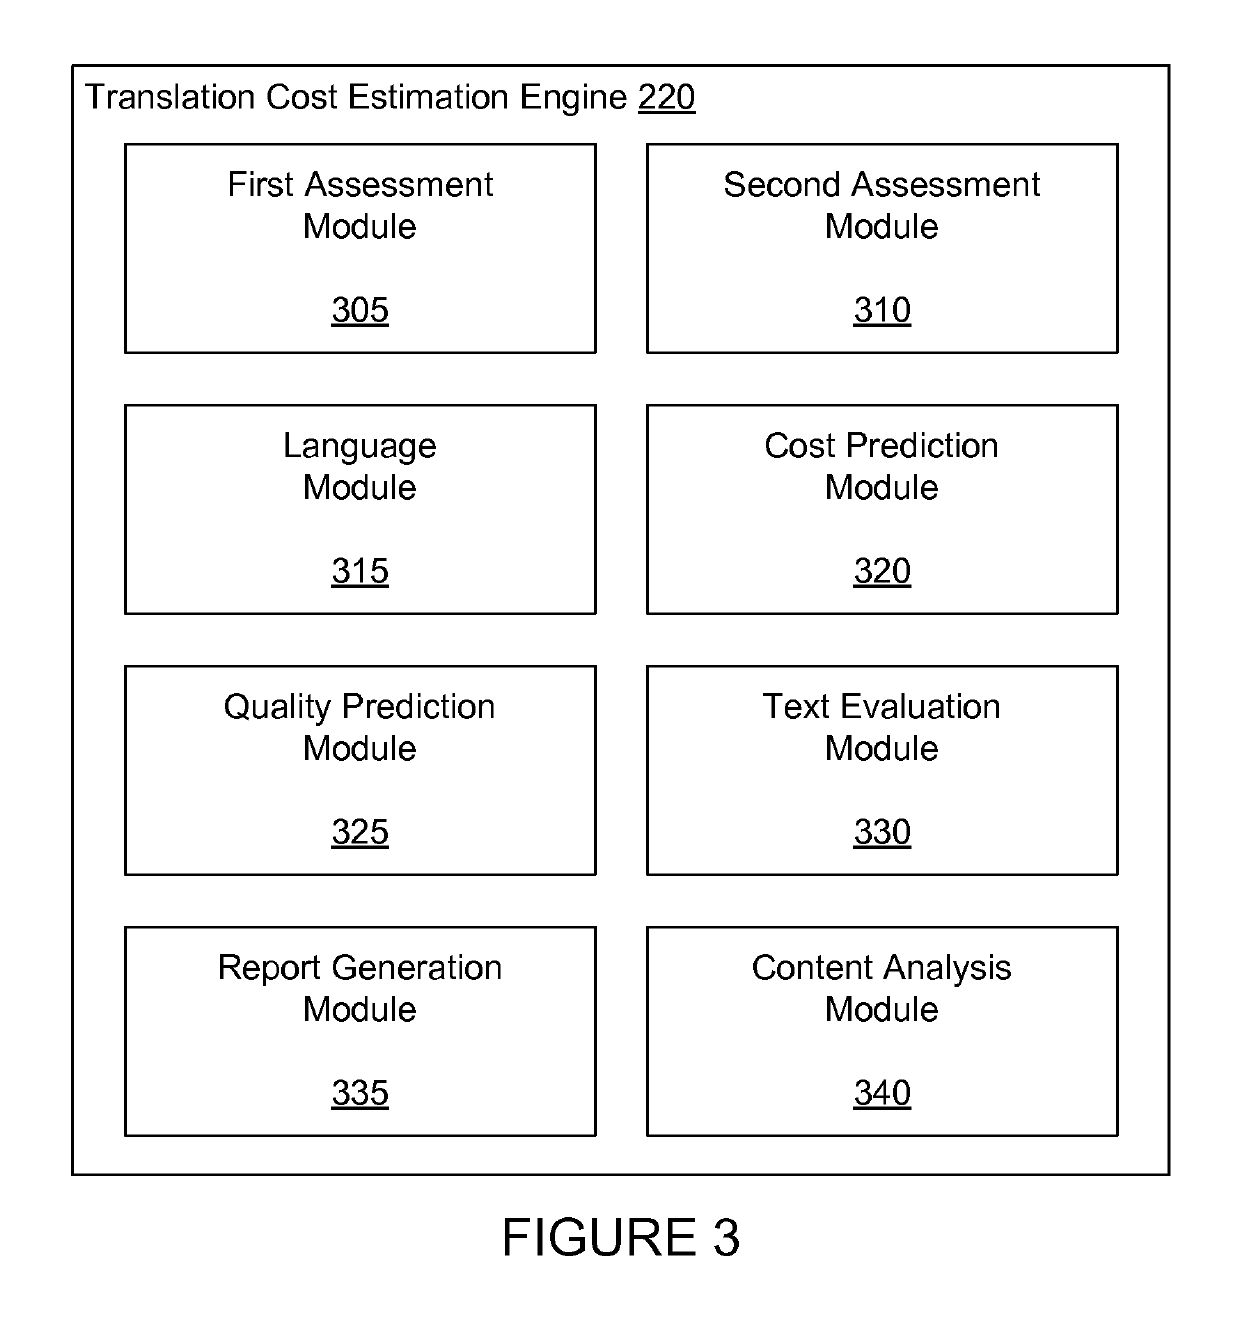 Predicting the cost associated with translating textual content